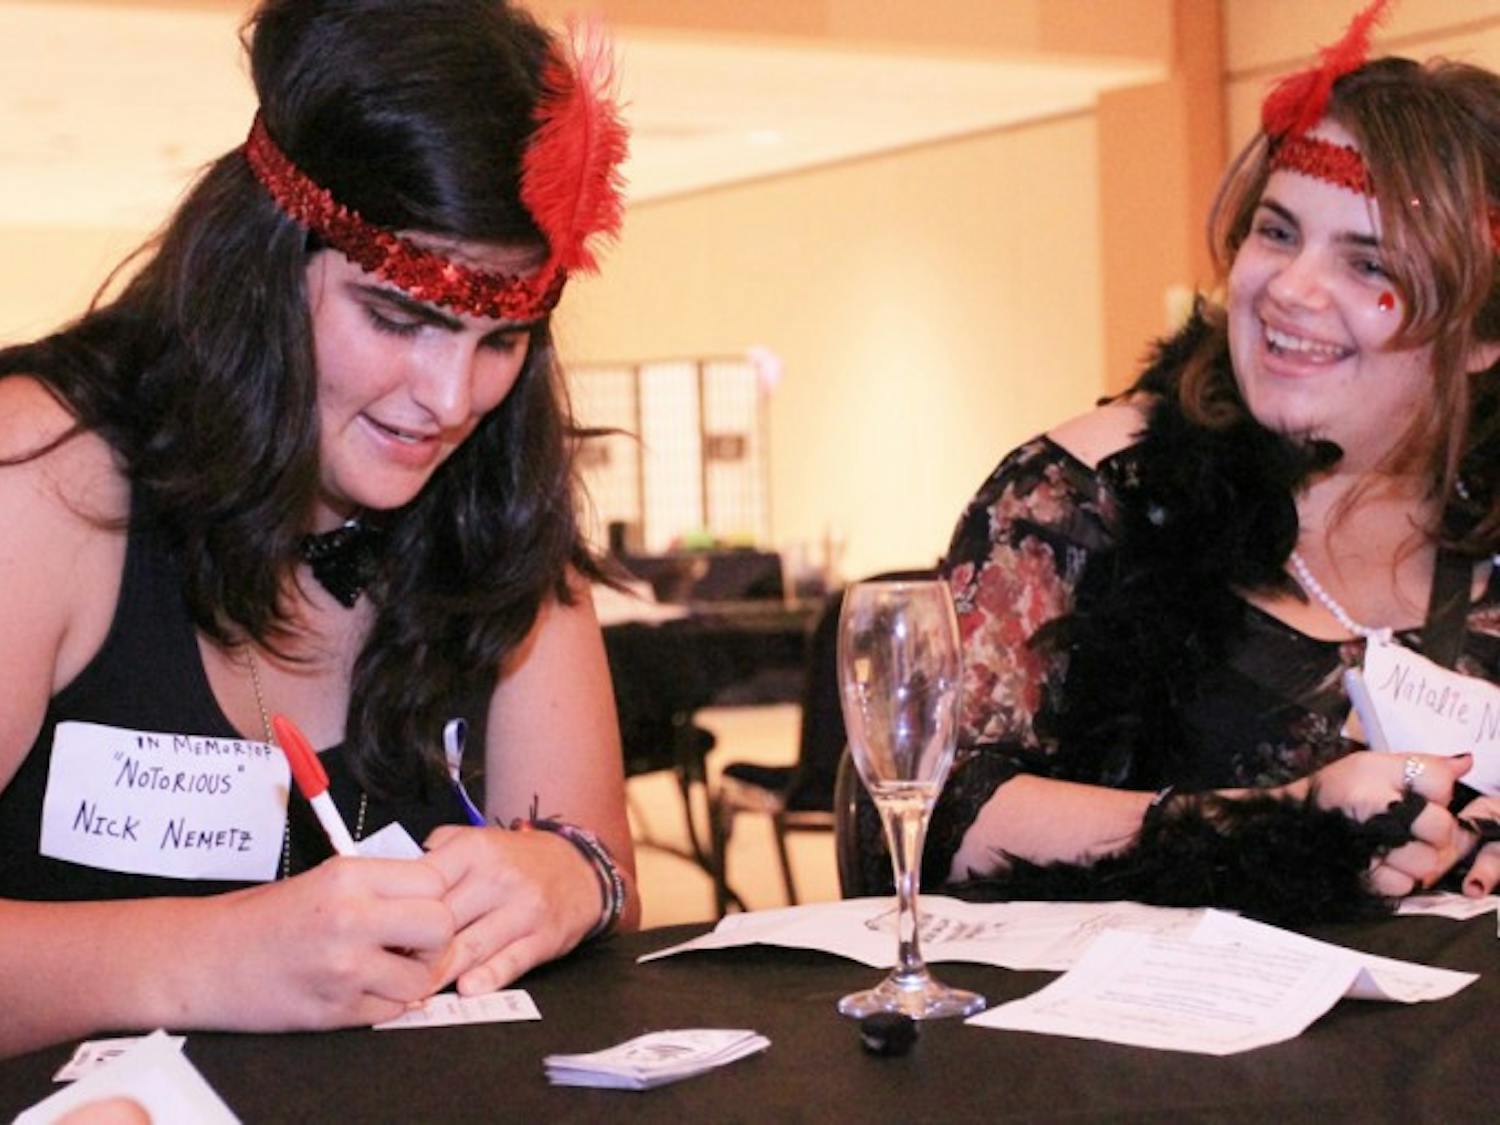 Murder at the Reitz -&nbsp;Eighteen-year-old freshmen Ryley Valenti, left, and Nadia Fernandez, dress up and play along with the Murder Mystery at the Reitz, a 1920s themed who-done-it event produced by RUB.